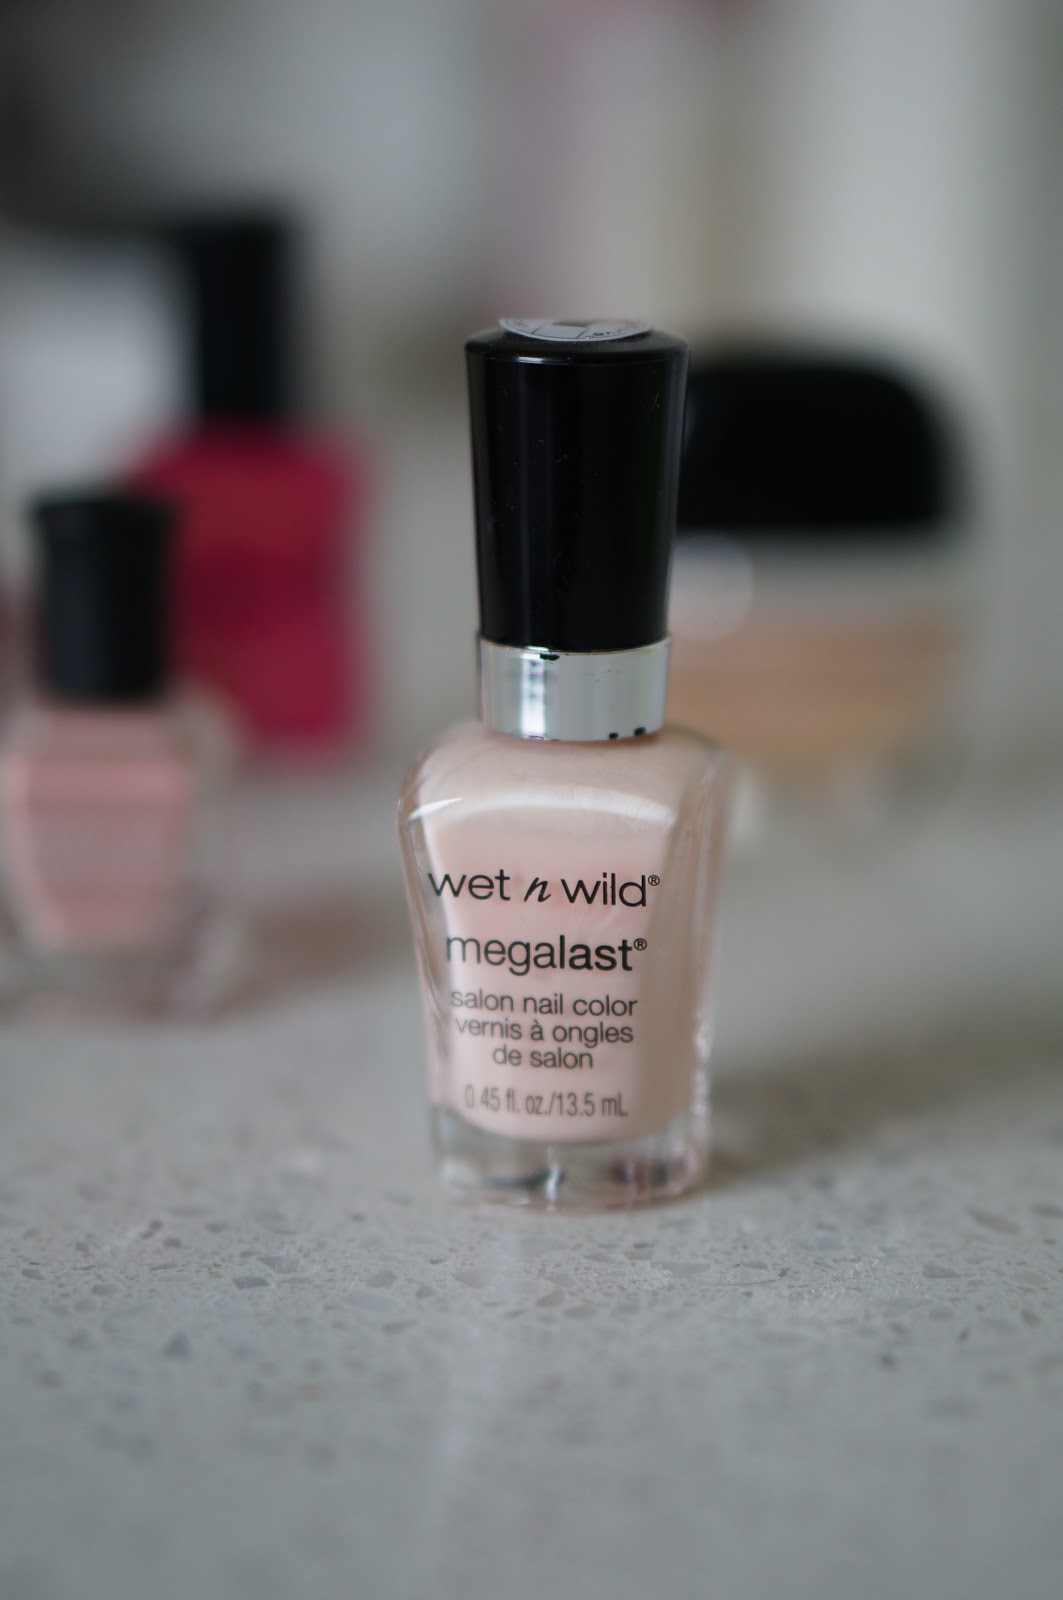 Popular North Carolina style blogger Rebecca Lately is sharing her top picks for spring nail polish.  Click here to read all about her cruelty free faves!